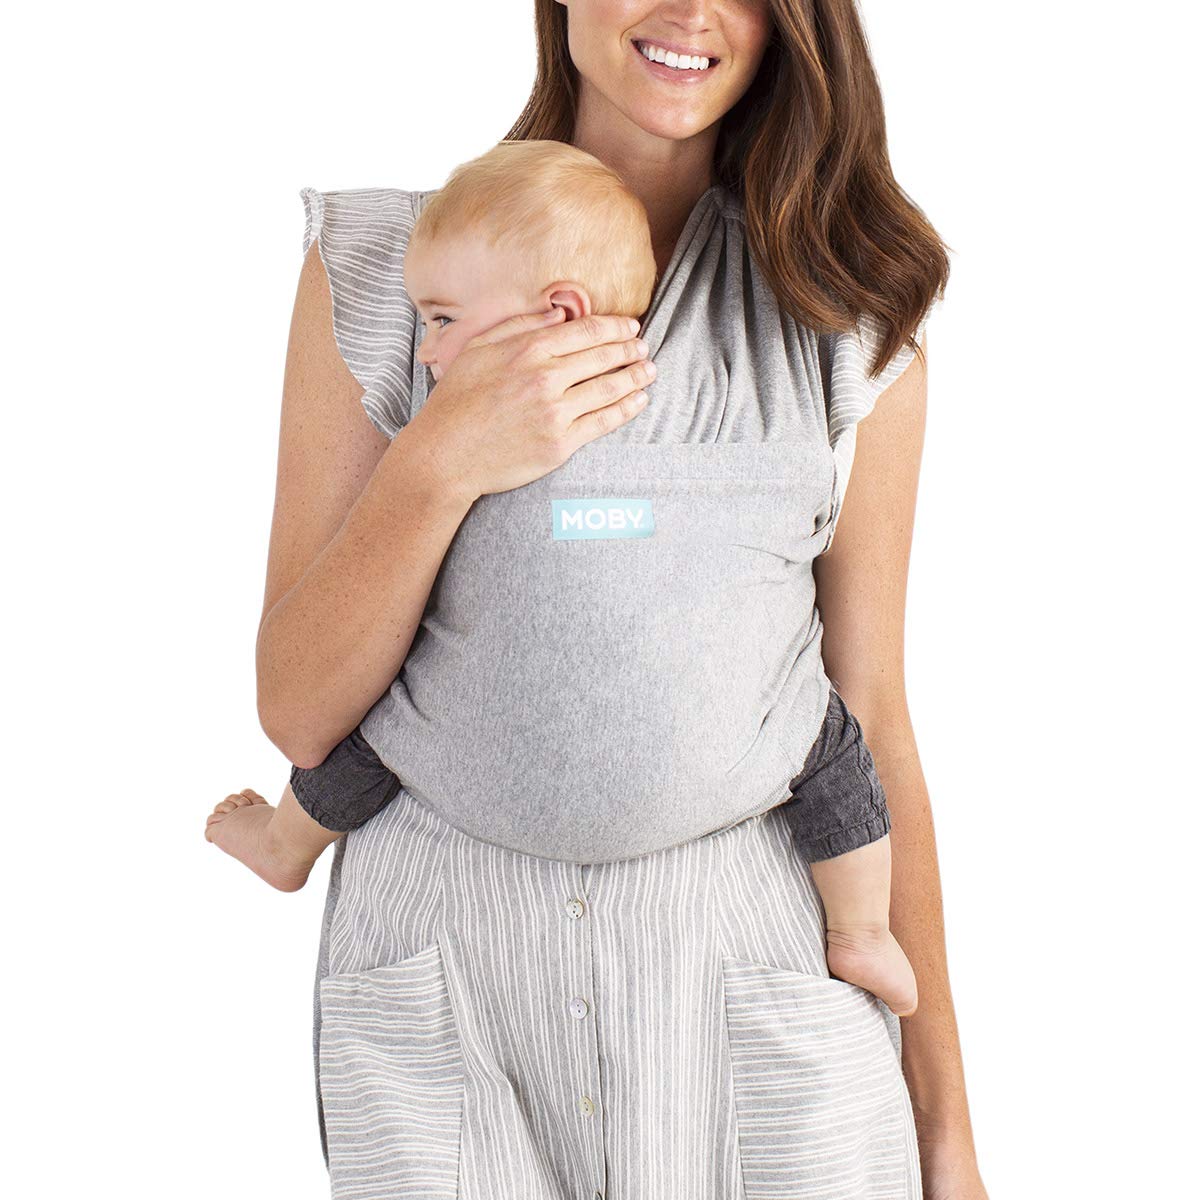 MOBY Fit Baby Sling for Newborns to Toddlers up to 30 lbs, Baby Sling from Birth, One Size, Breathable, Stretchy, 100% Cotton, Unisex, Grey